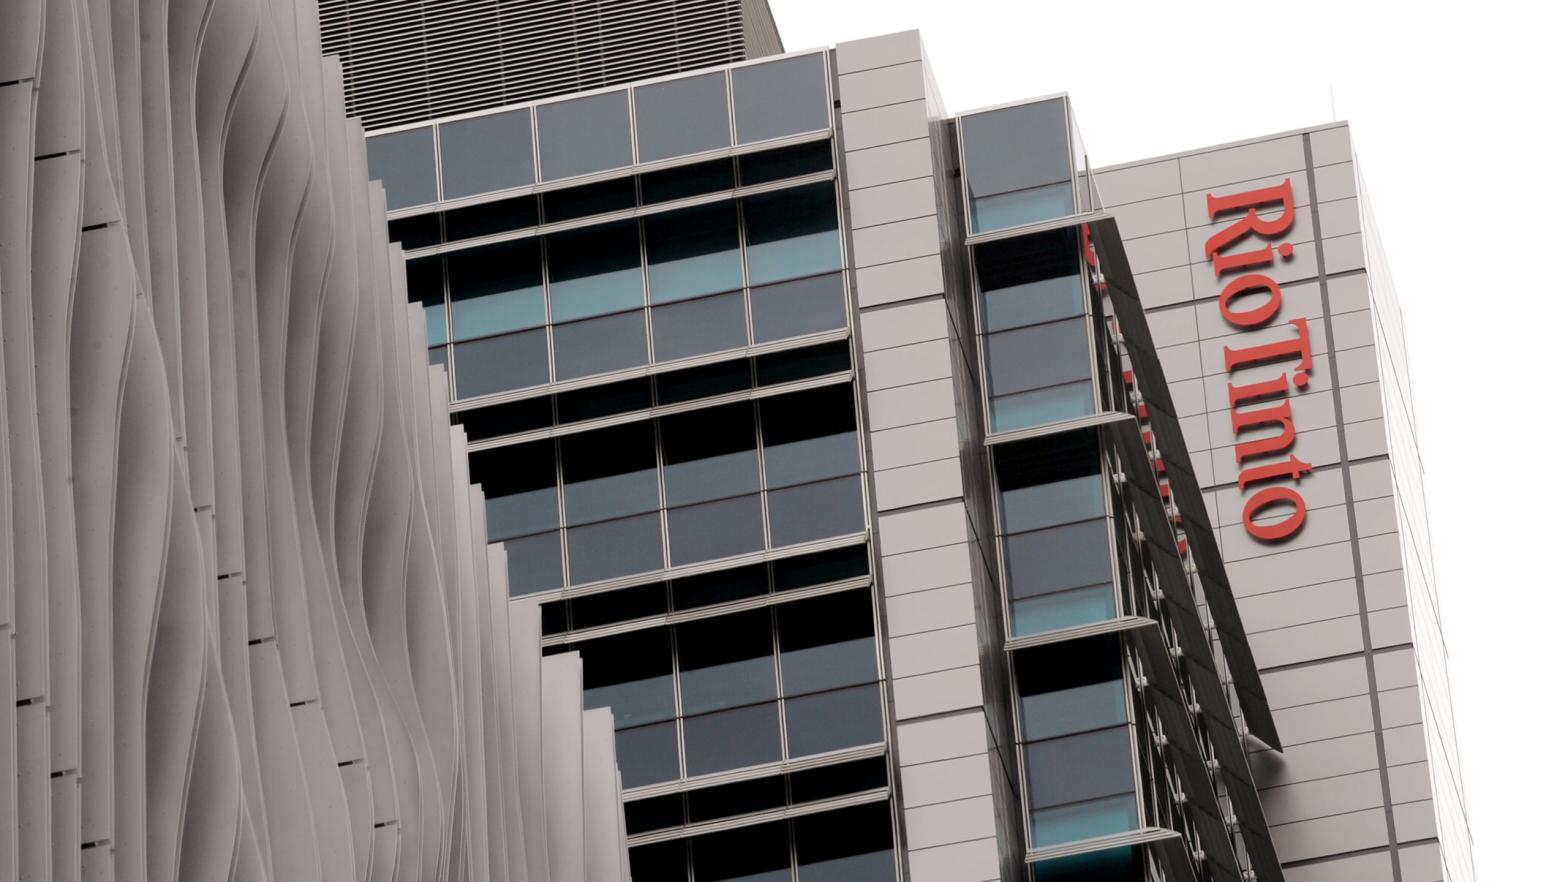 The Rio Tinto building in Brisbane. (Photo: William West/AFP, Getty Images)